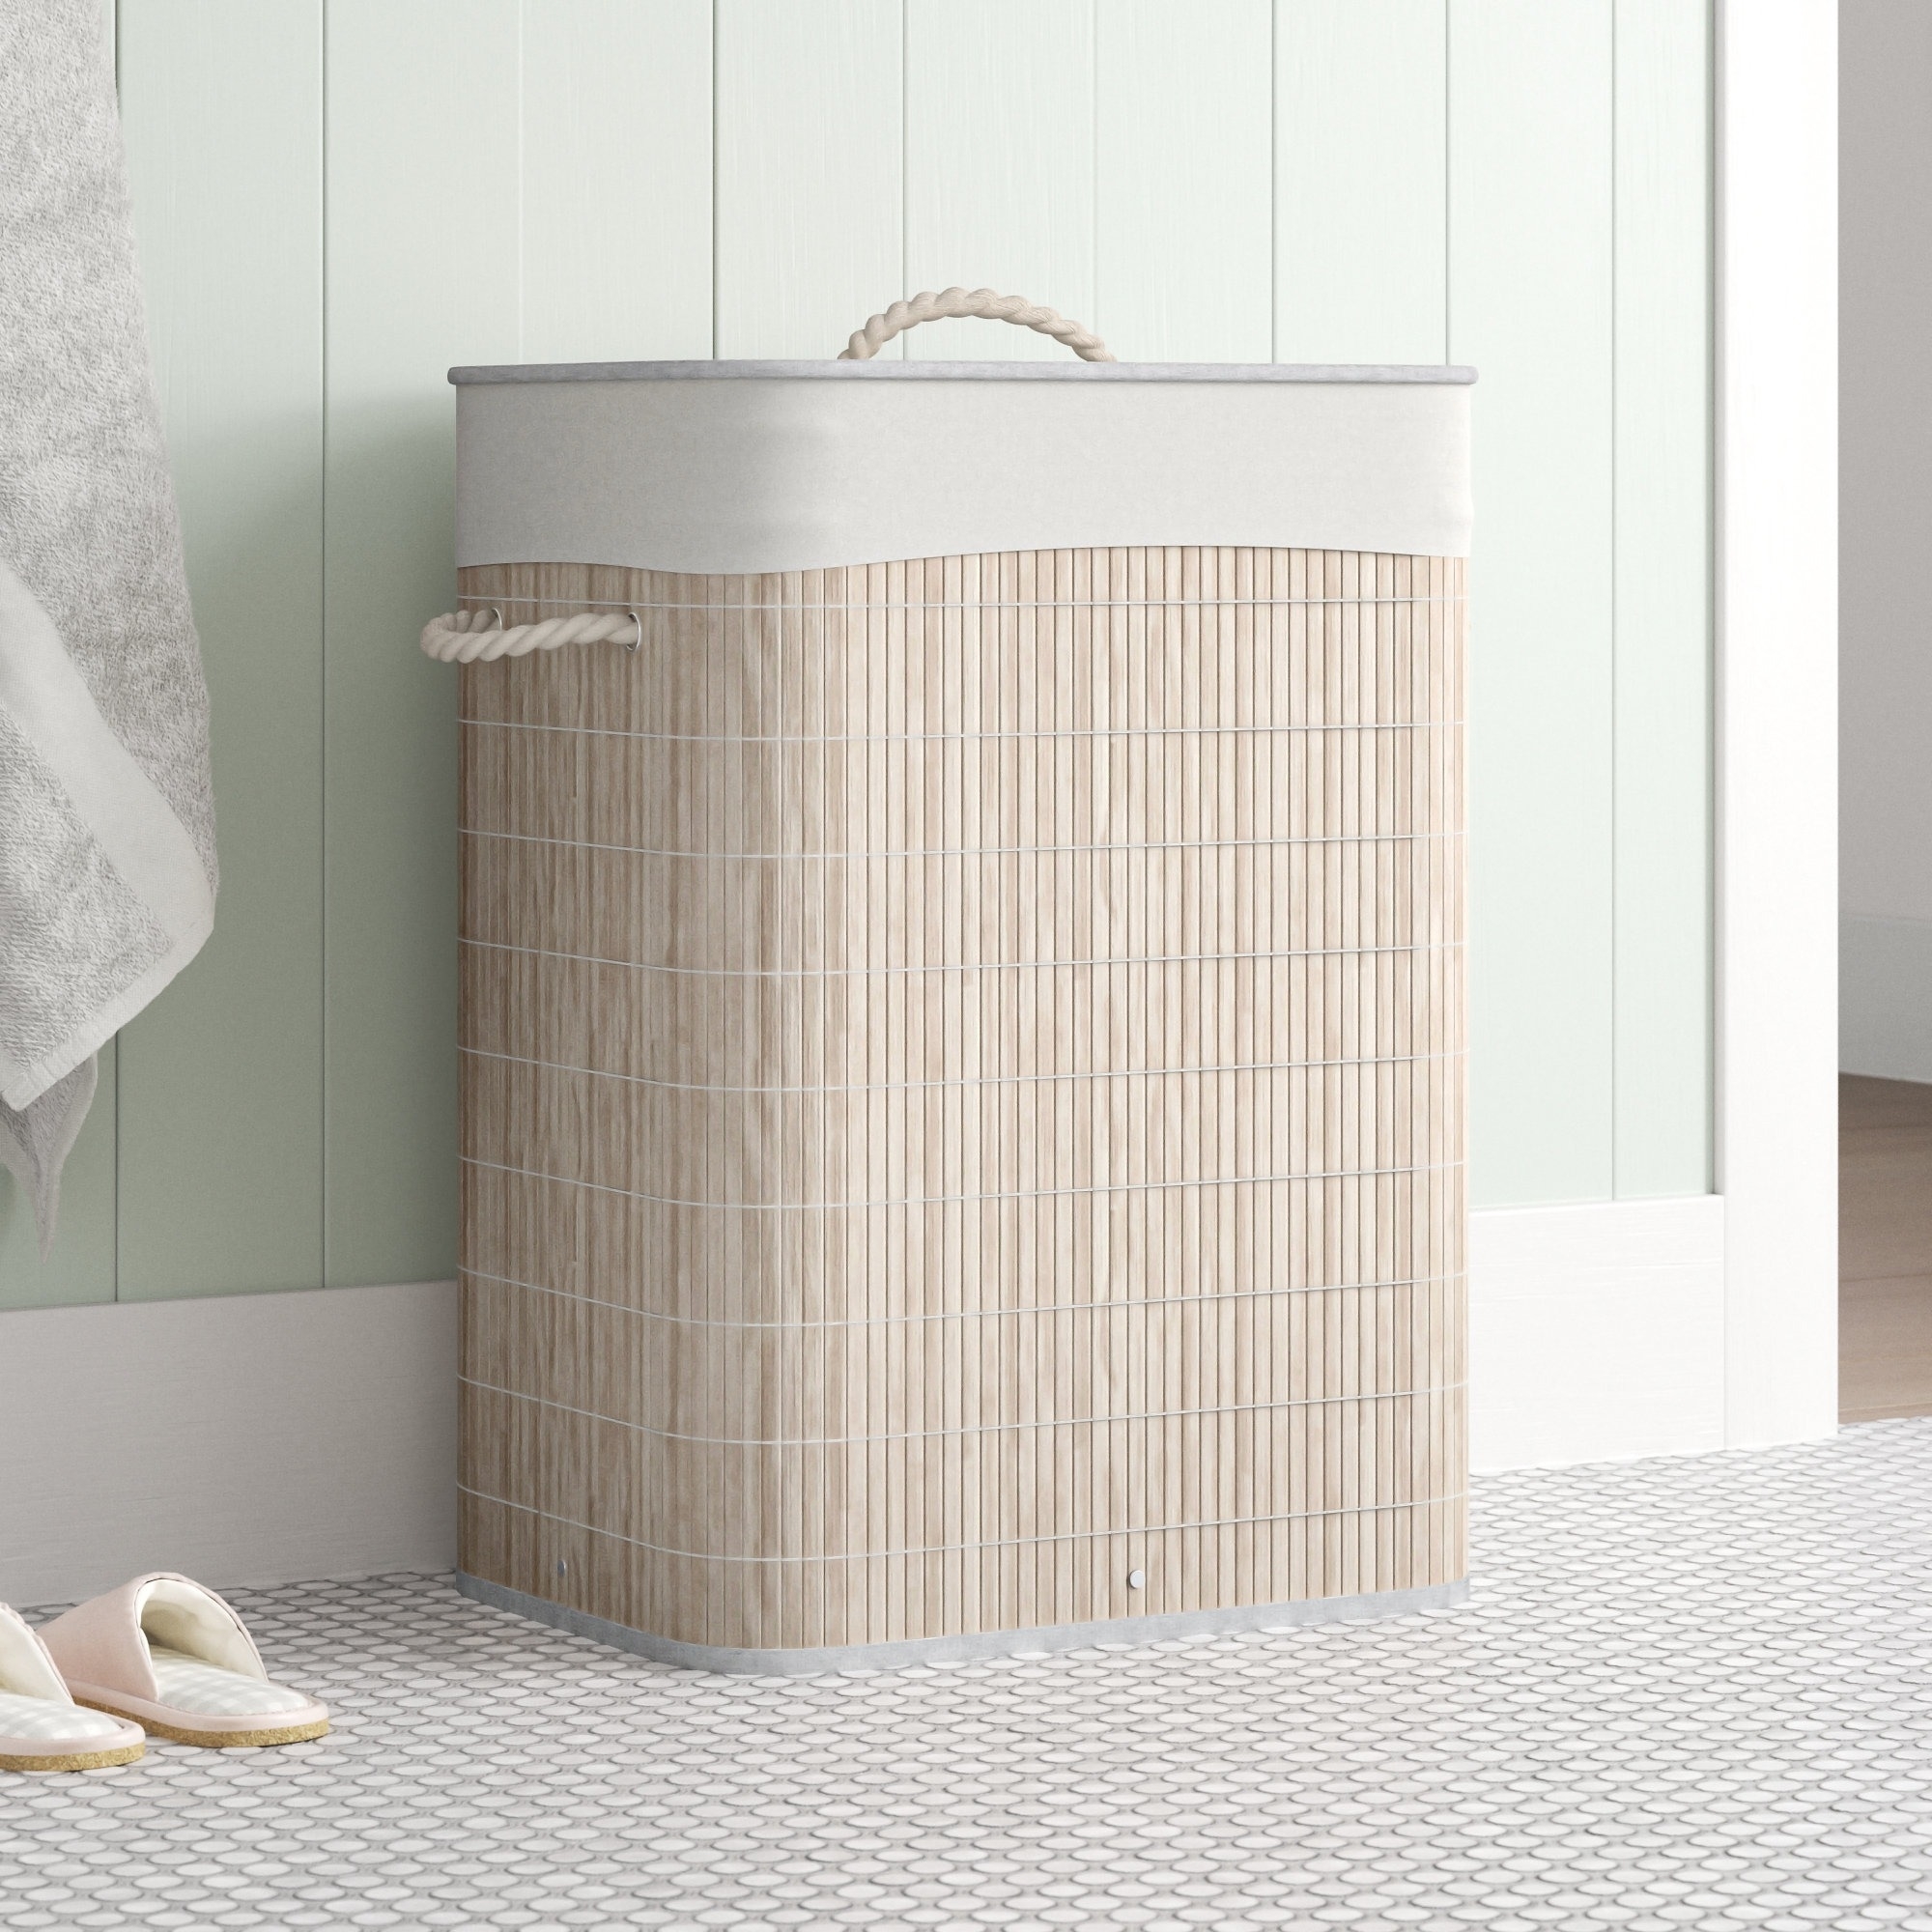 the rectangular hamper with a matching lid in a bathroom